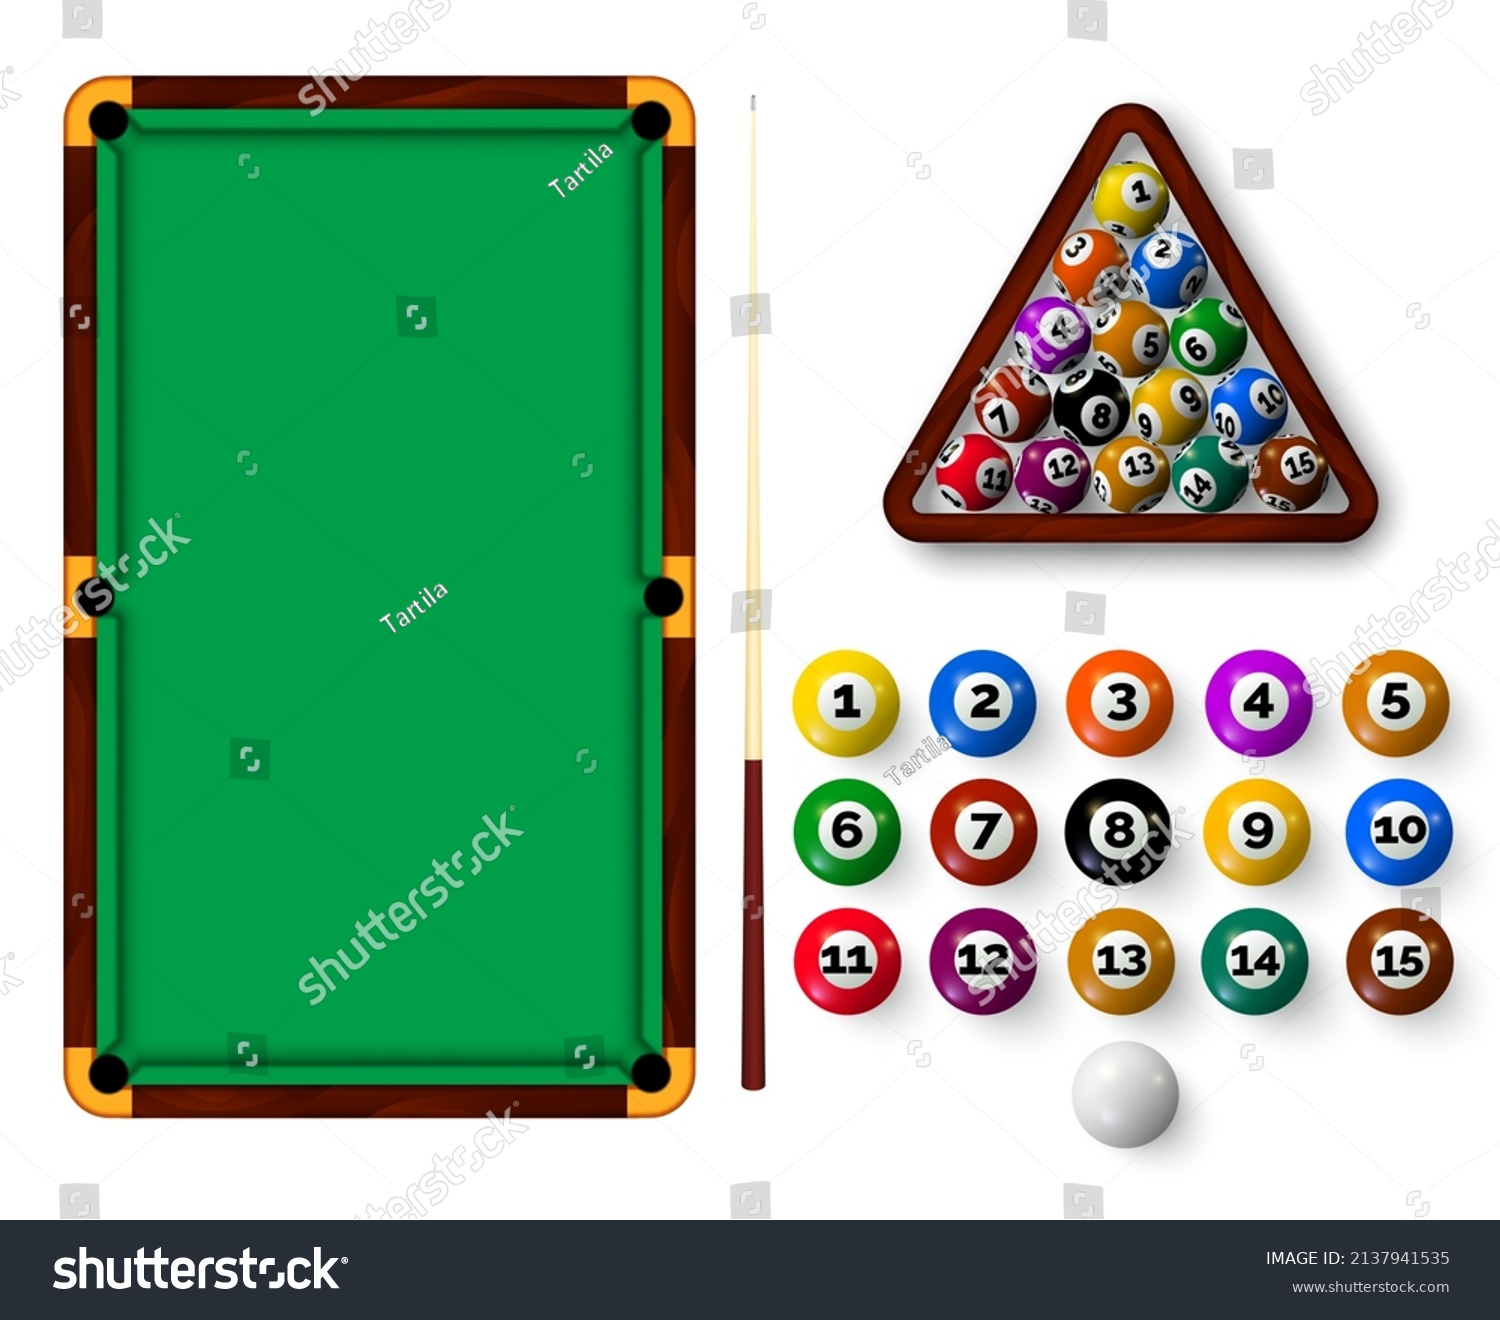 SVG of Billiard table with pockets, balls, triangle rack and cue. Realistic snooker sport equipment, green pool table top view and ball vector set. Game for entertainment and recreation or professional sport svg